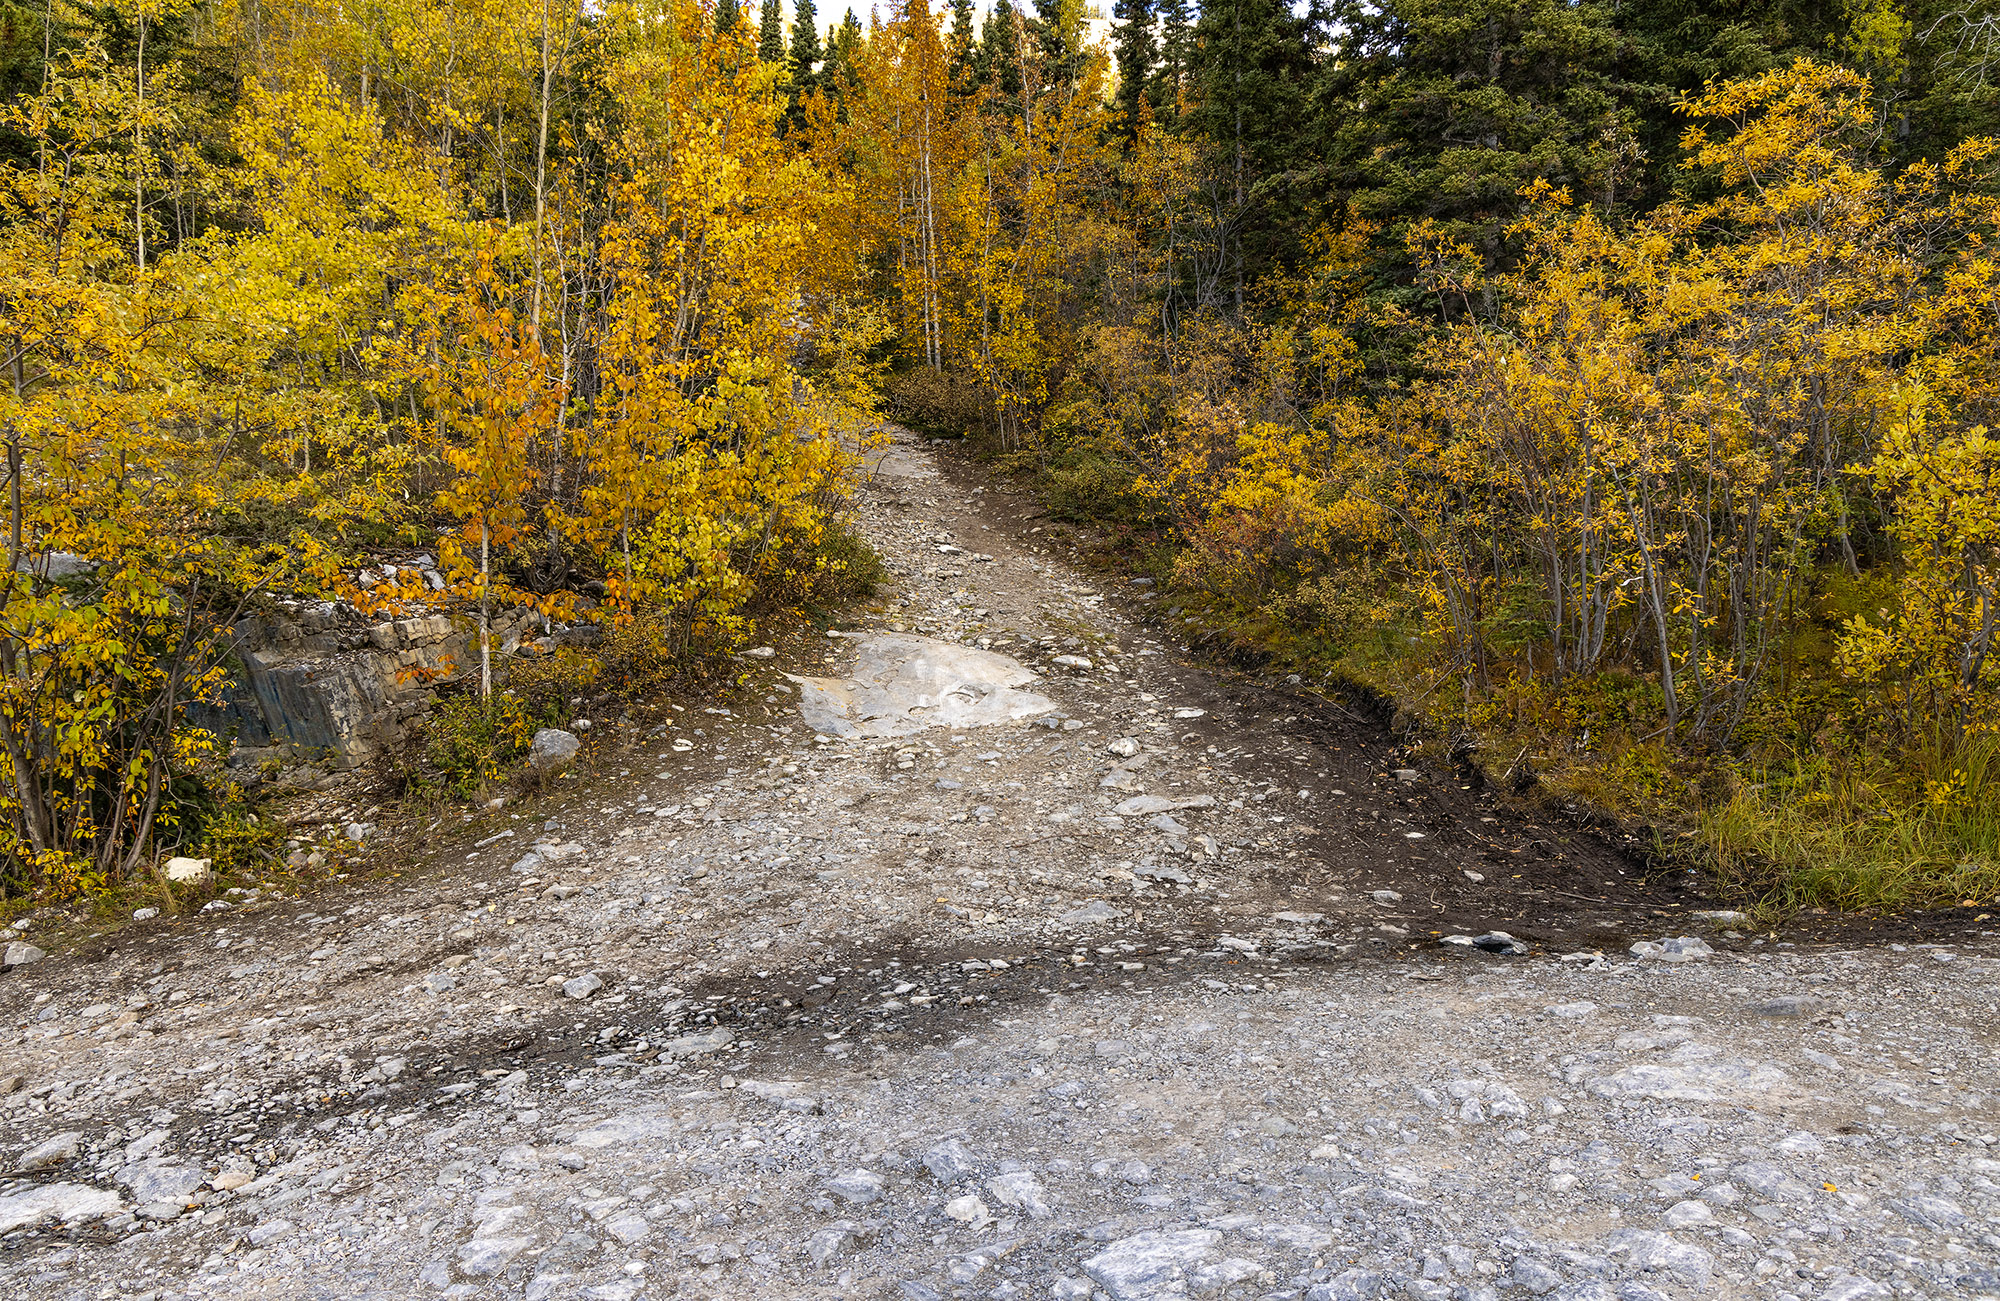 The start of a trail to get to Grey Mountain Cave in Whitehorse, Yukon, pictured on Sept. 19, 2021. (Steve Silva)